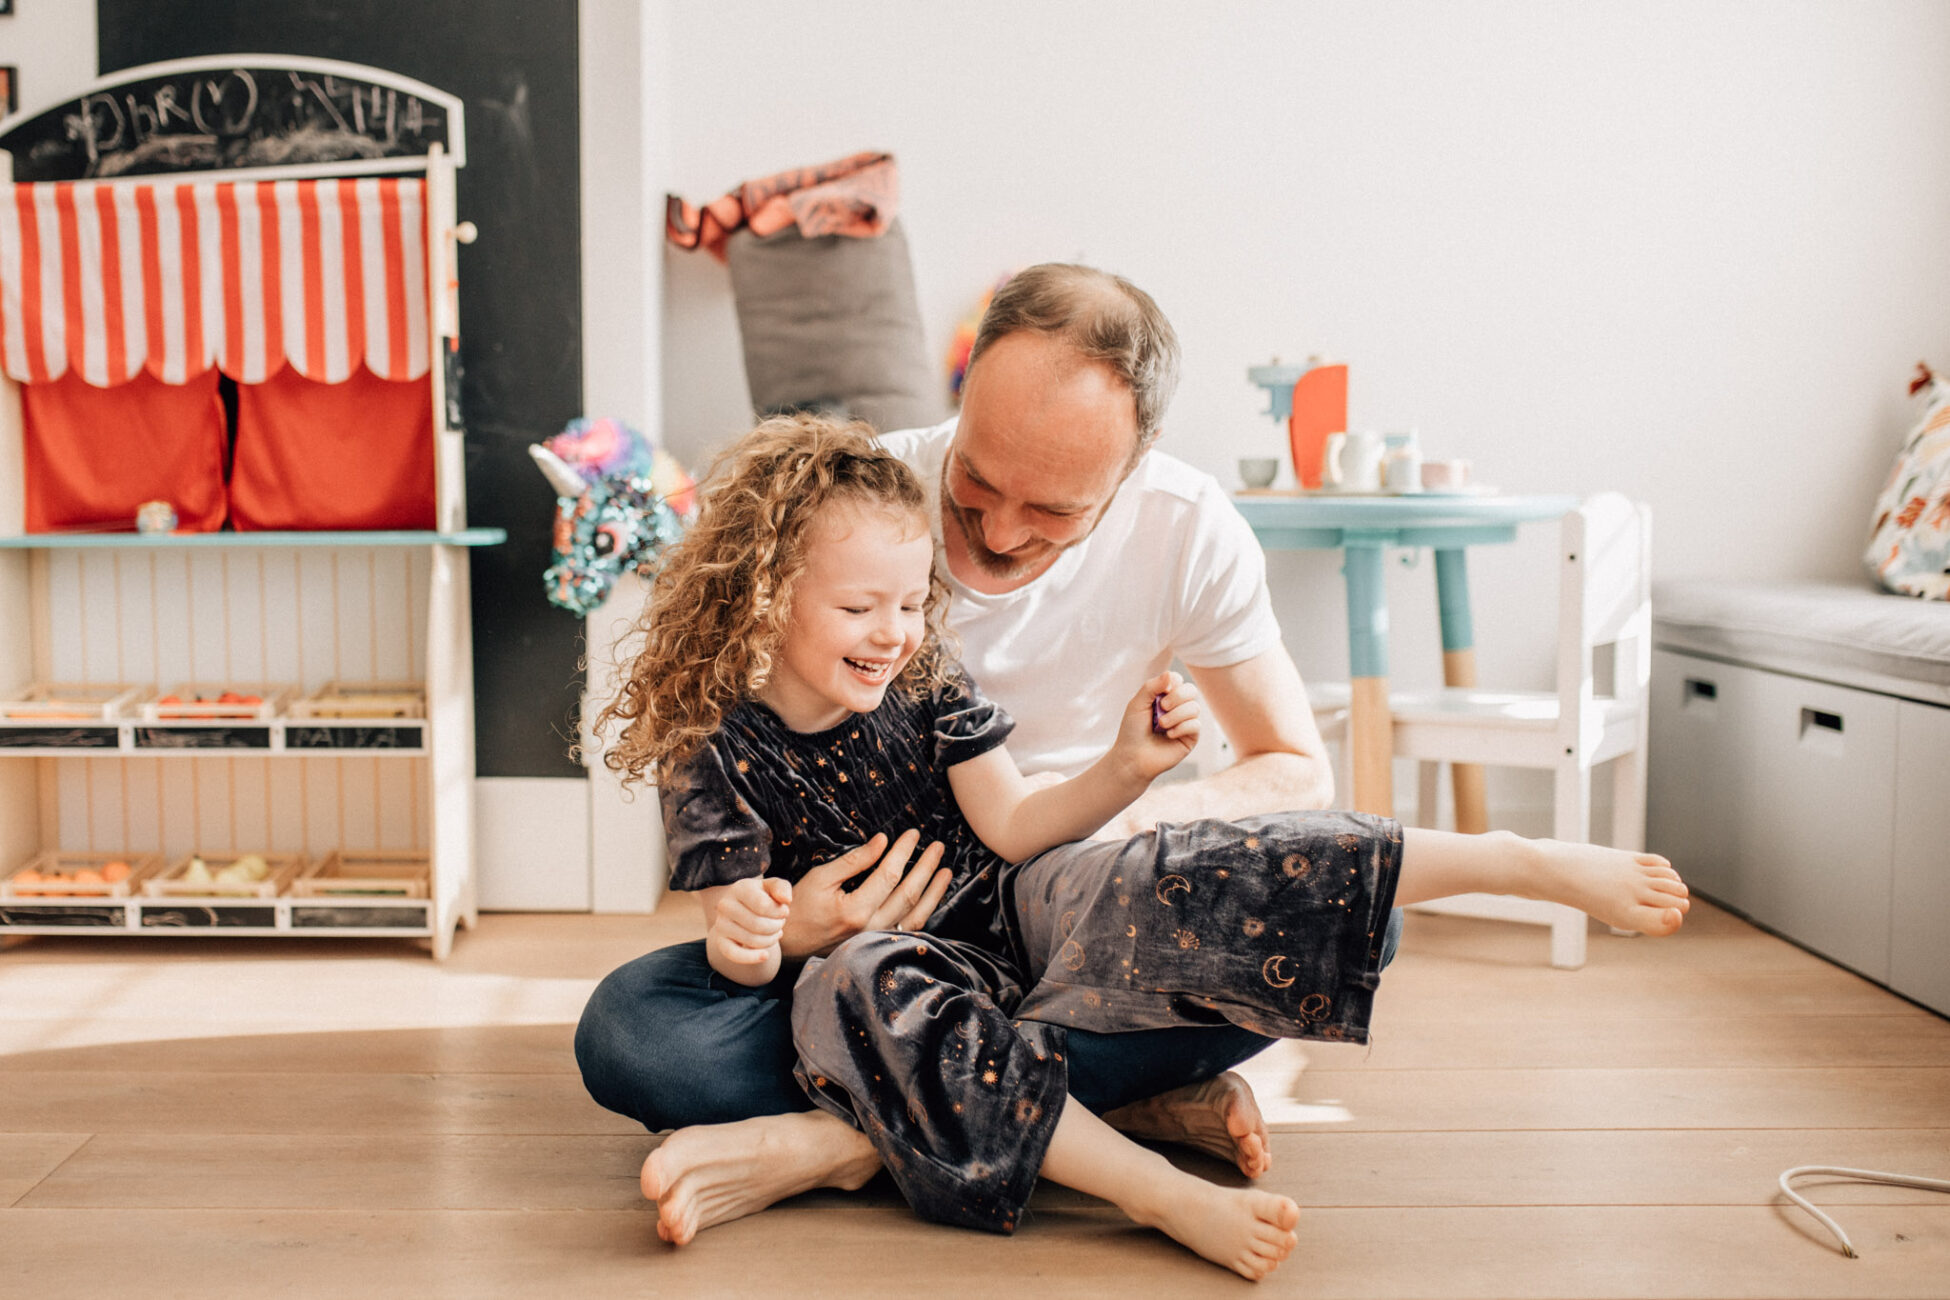 Father and daughter playing in the floor, during a Family photography session at home, in Amsterdam, The Netherlands